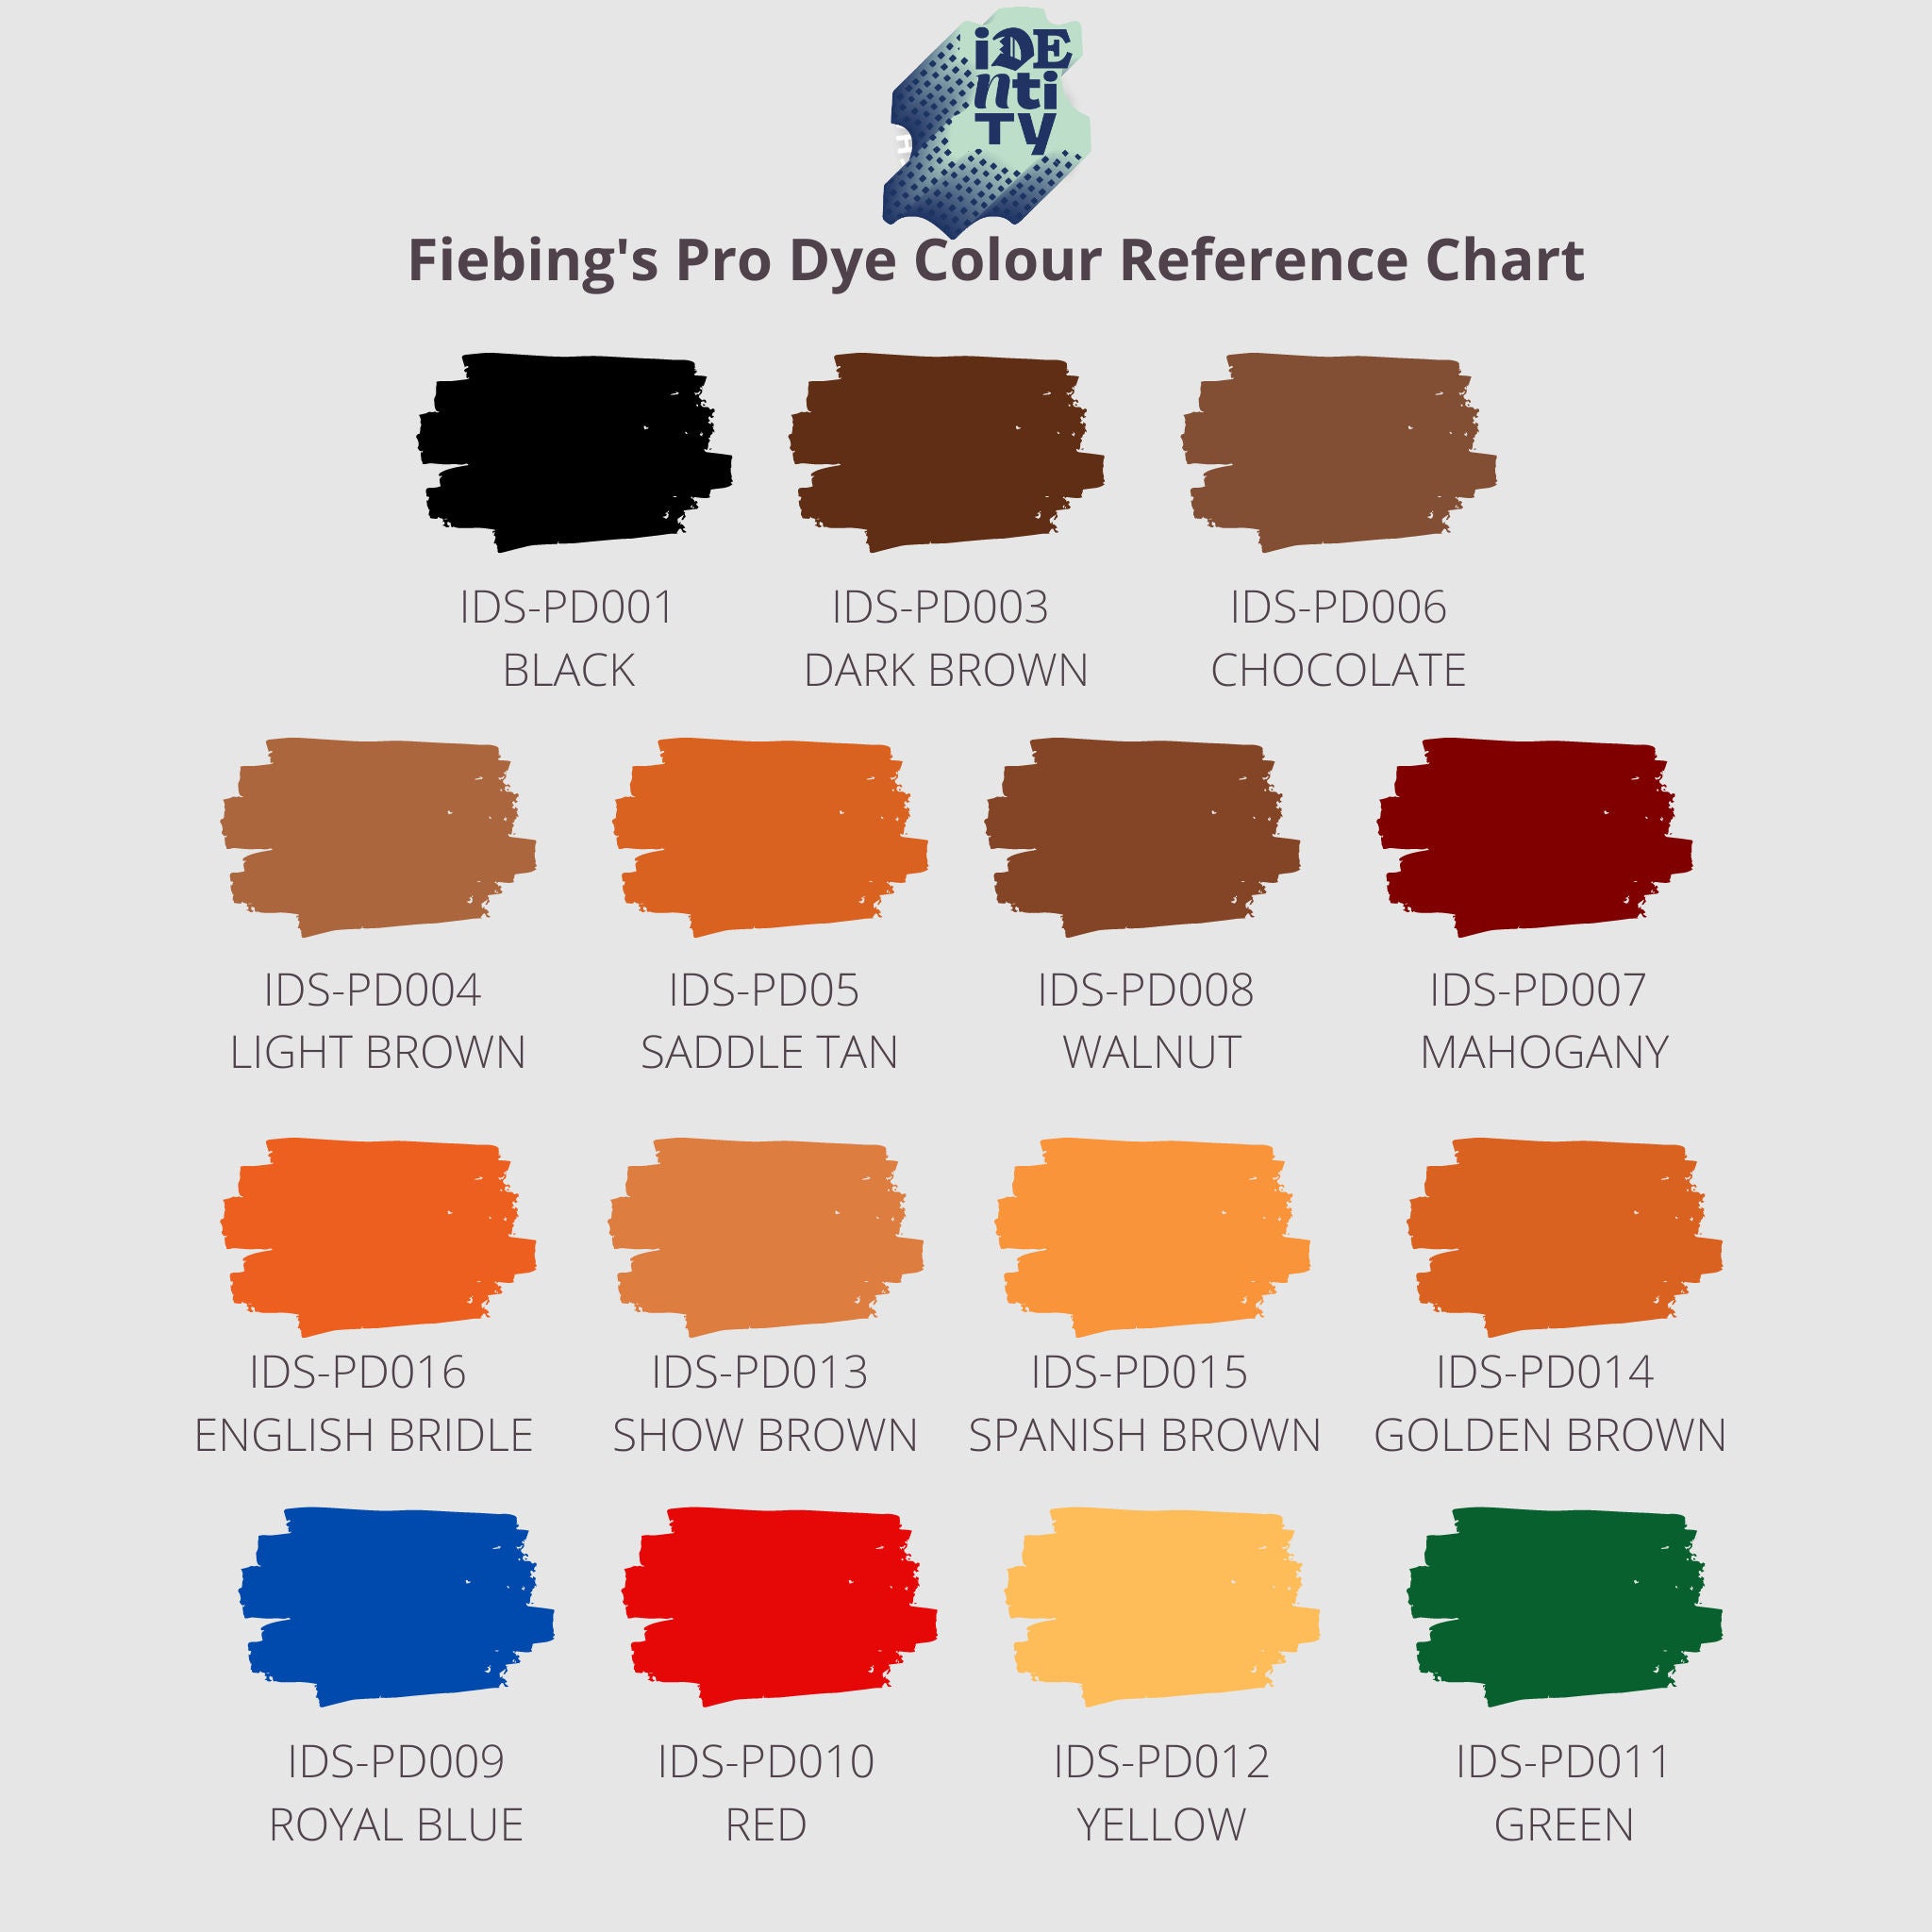 Fiebing's Pro Dye colour reference chart from Identity Leathercraft